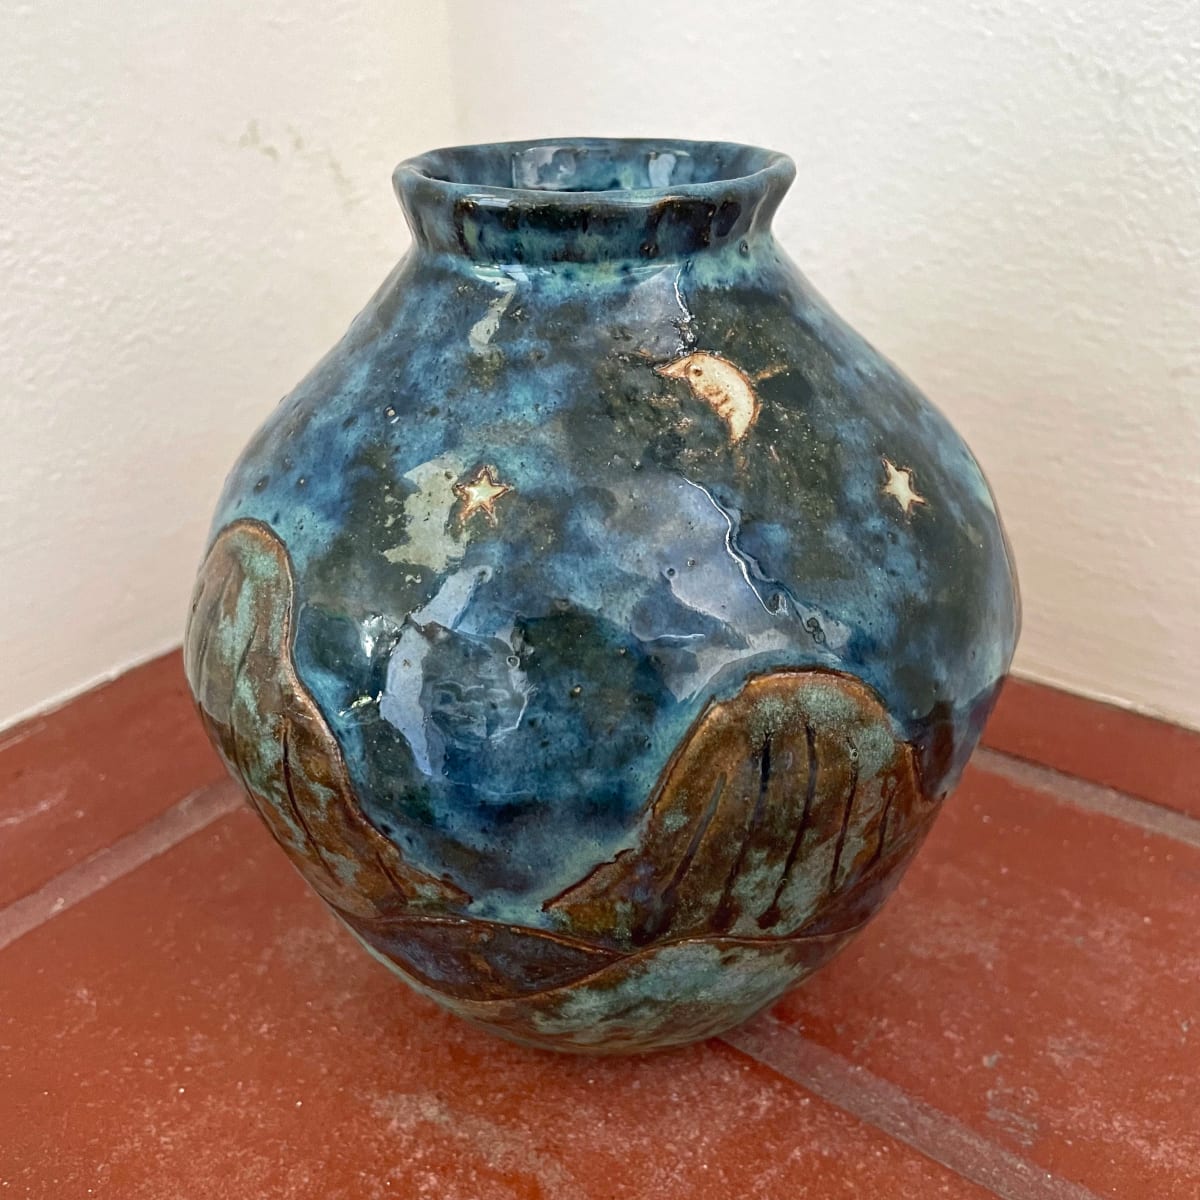 Starry Night and Mountains Vase by Nell Eakin  Image: The Starry Night Vase